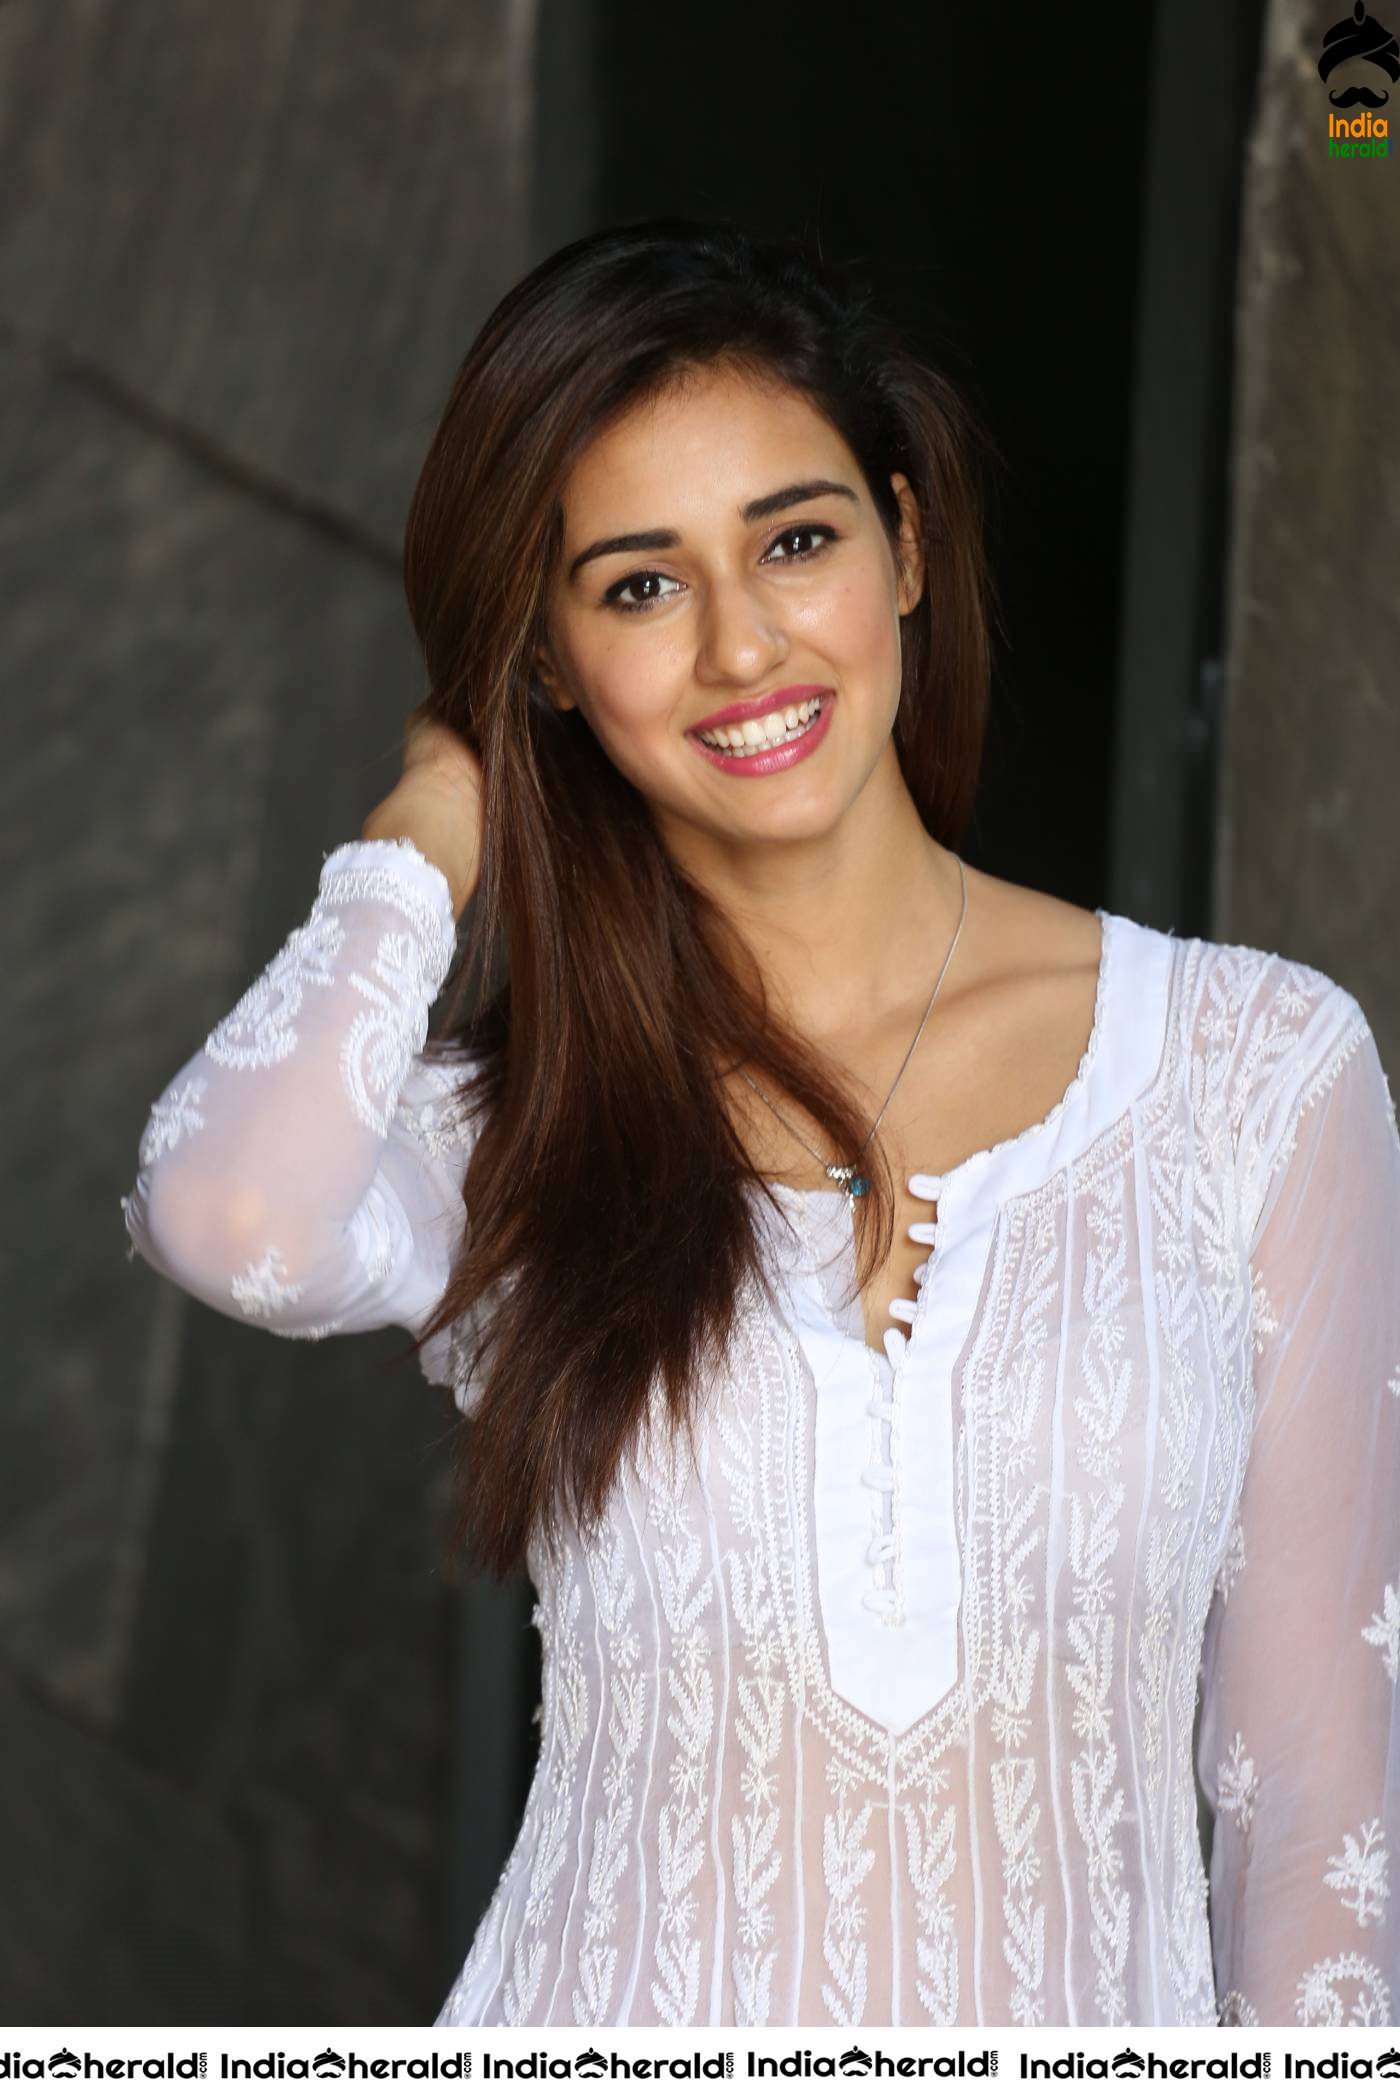 Disha Patani showing her Inner Beauty in Transparent White Dress